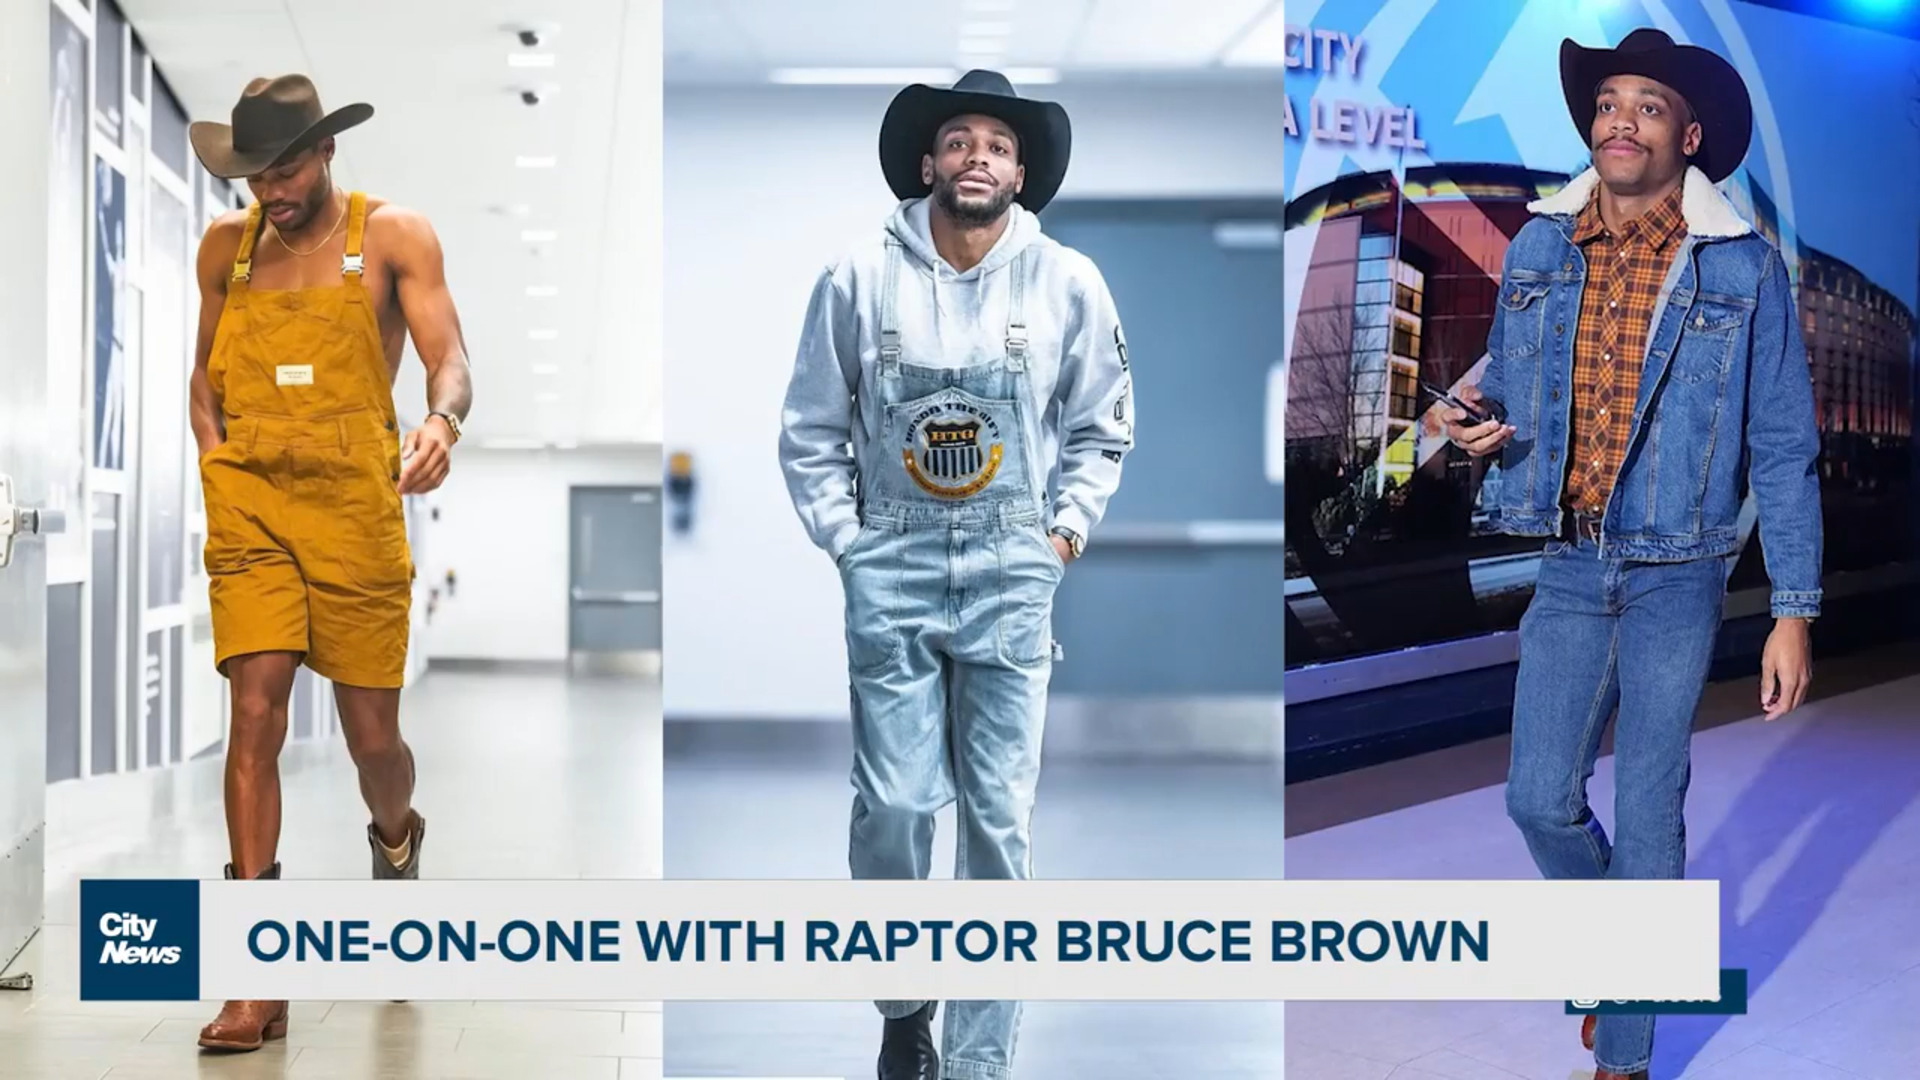 Raptor Bruce Brown bringing the ‘yeehaw’ to the team